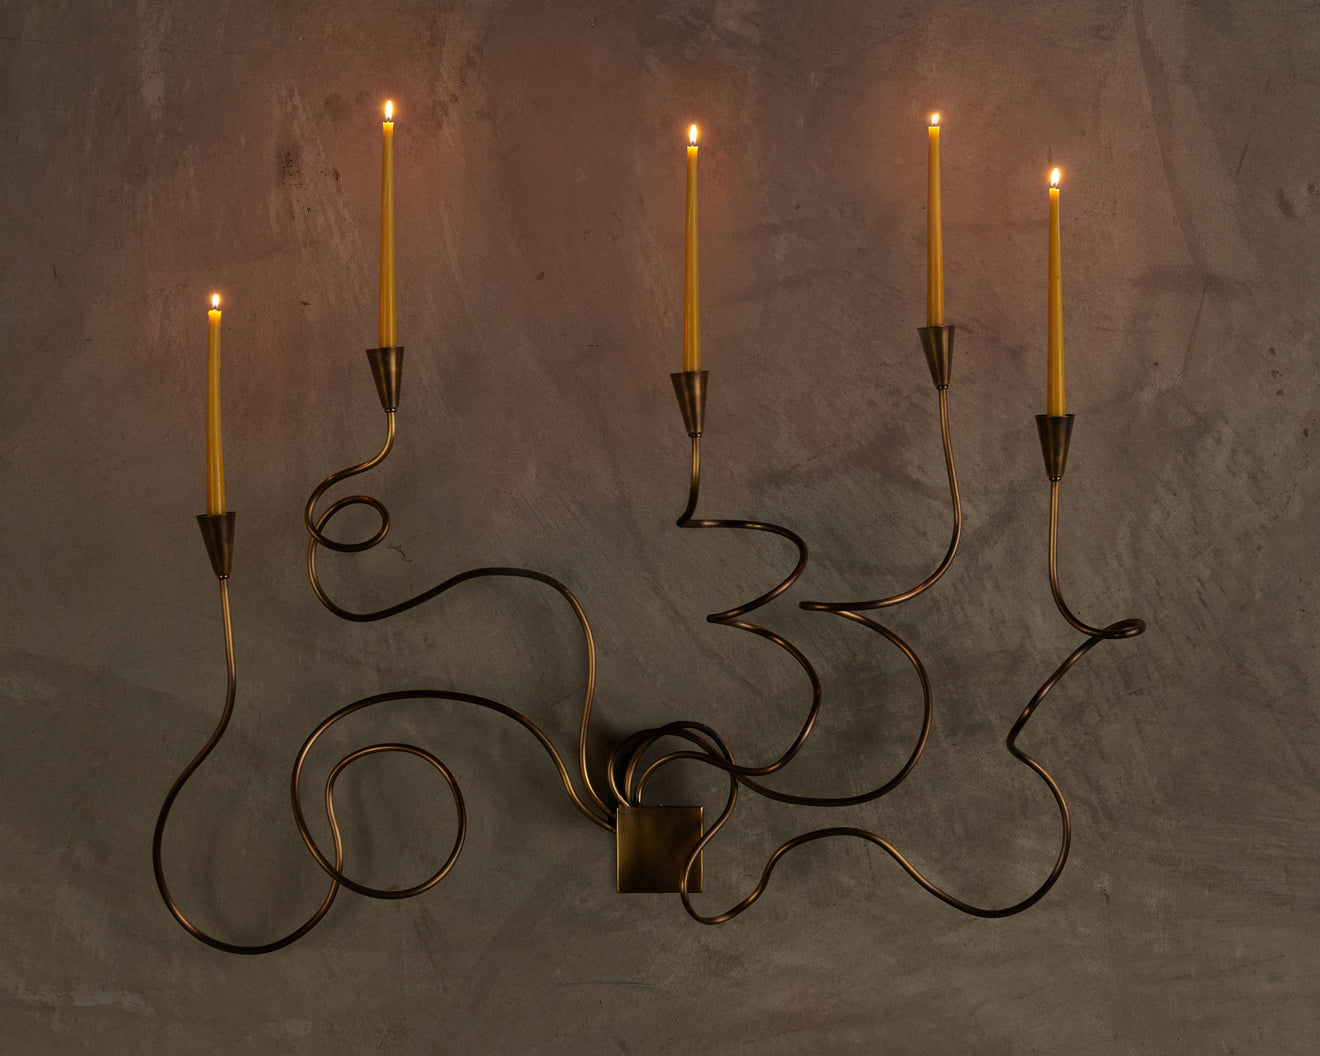 WILLOW CANDELABRA BY HEATHER LEE